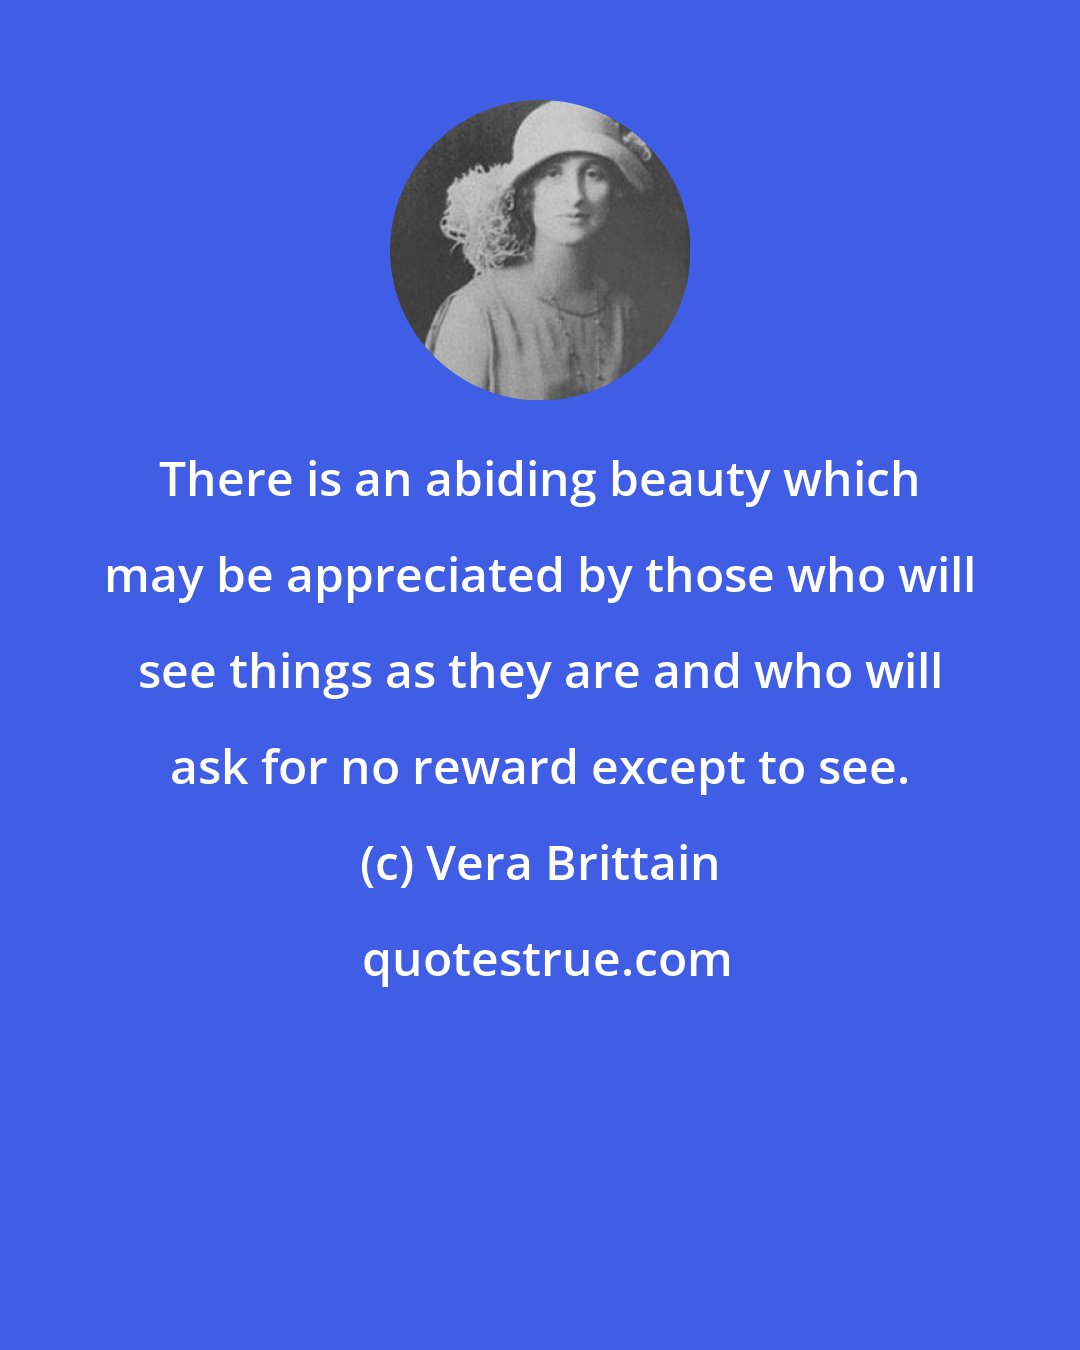 Vera Brittain: There is an abiding beauty which may be appreciated by those who will see things as they are and who will ask for no reward except to see.